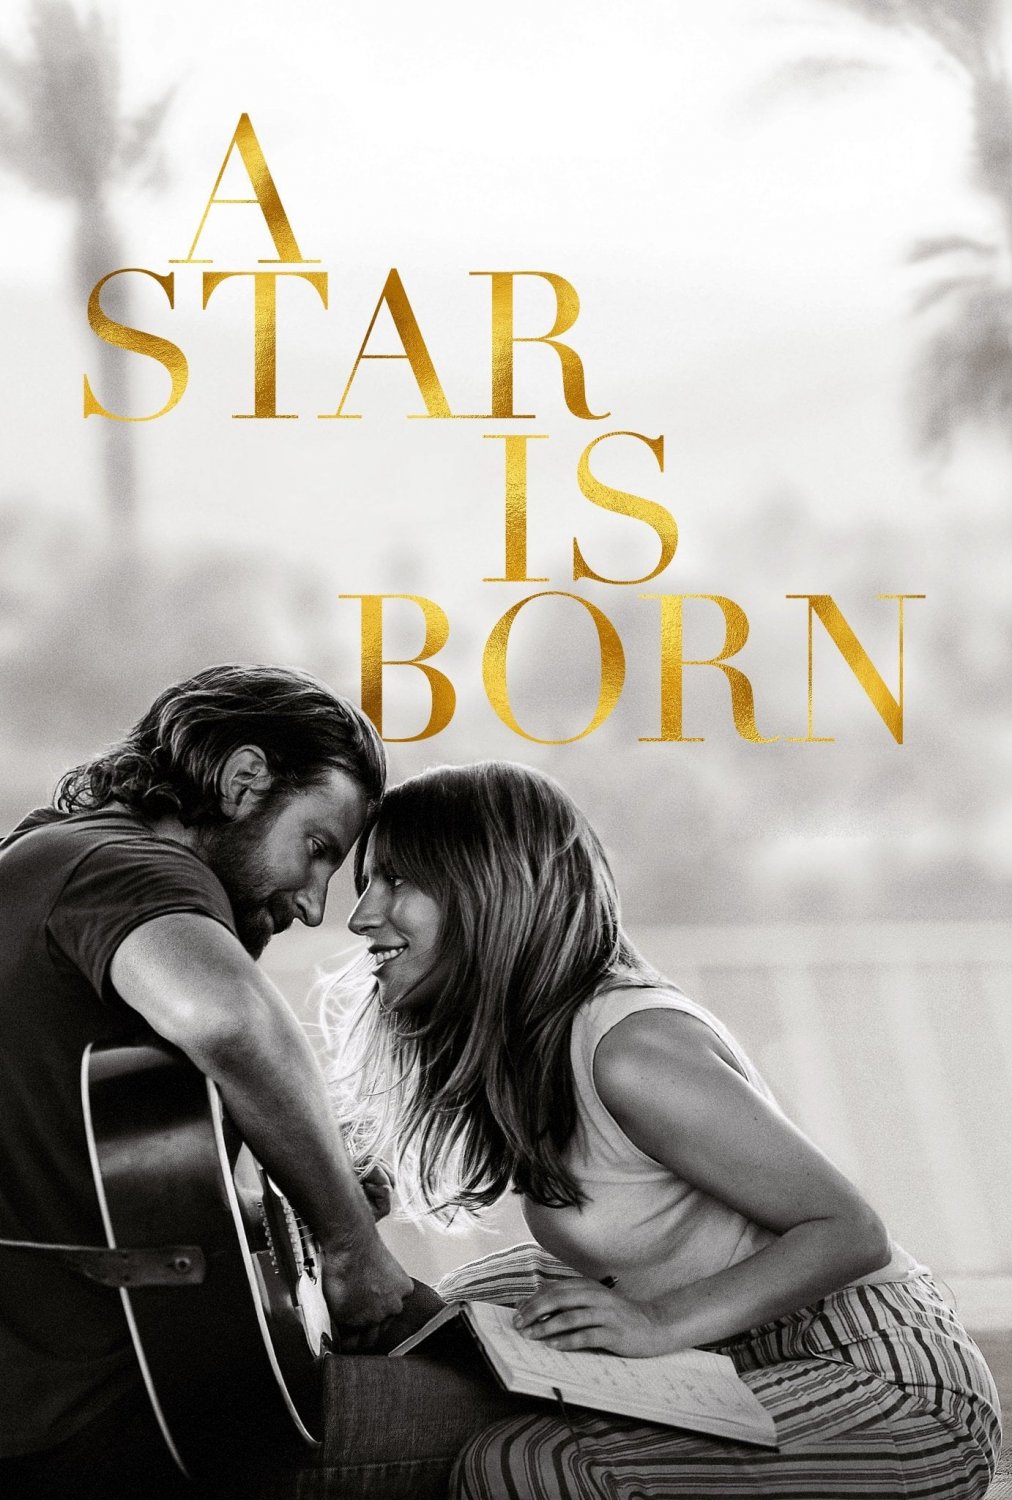 A Star is Born 2018 Movie 13"x19" (32cm/49cm) Polyester Fabric Poster